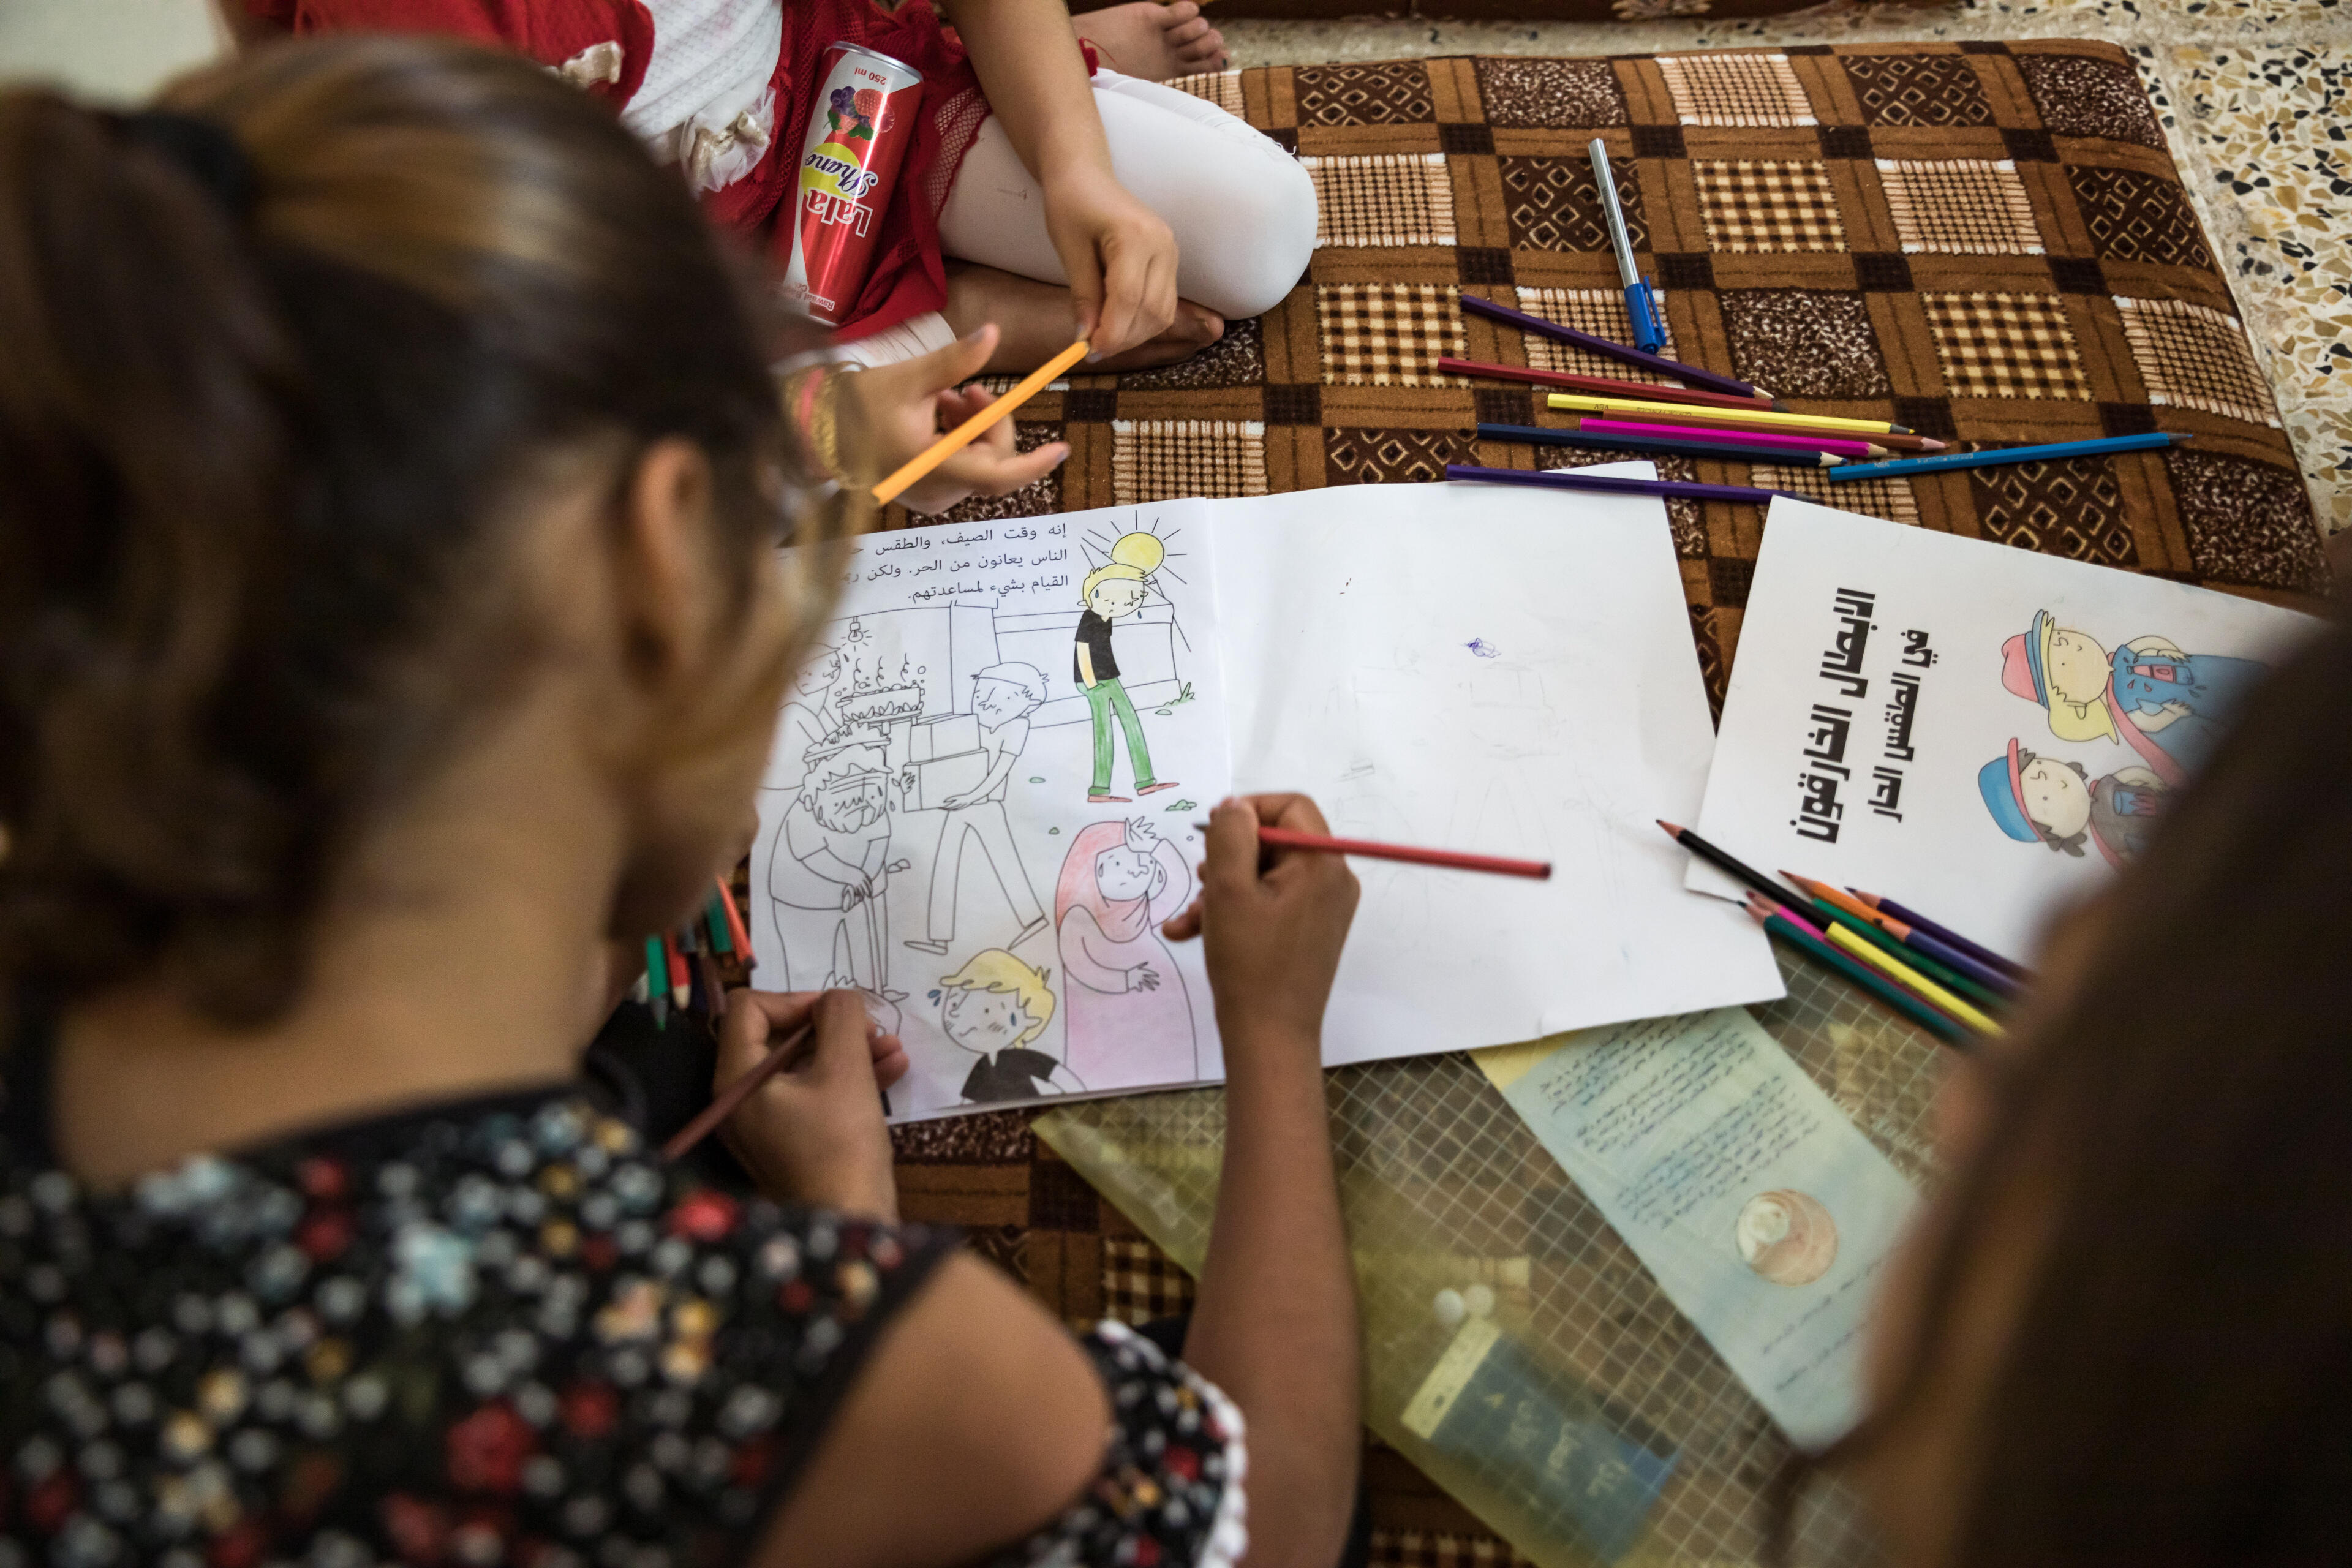 Children in Sinjar, Iraq sit on the floor of their home, coloring